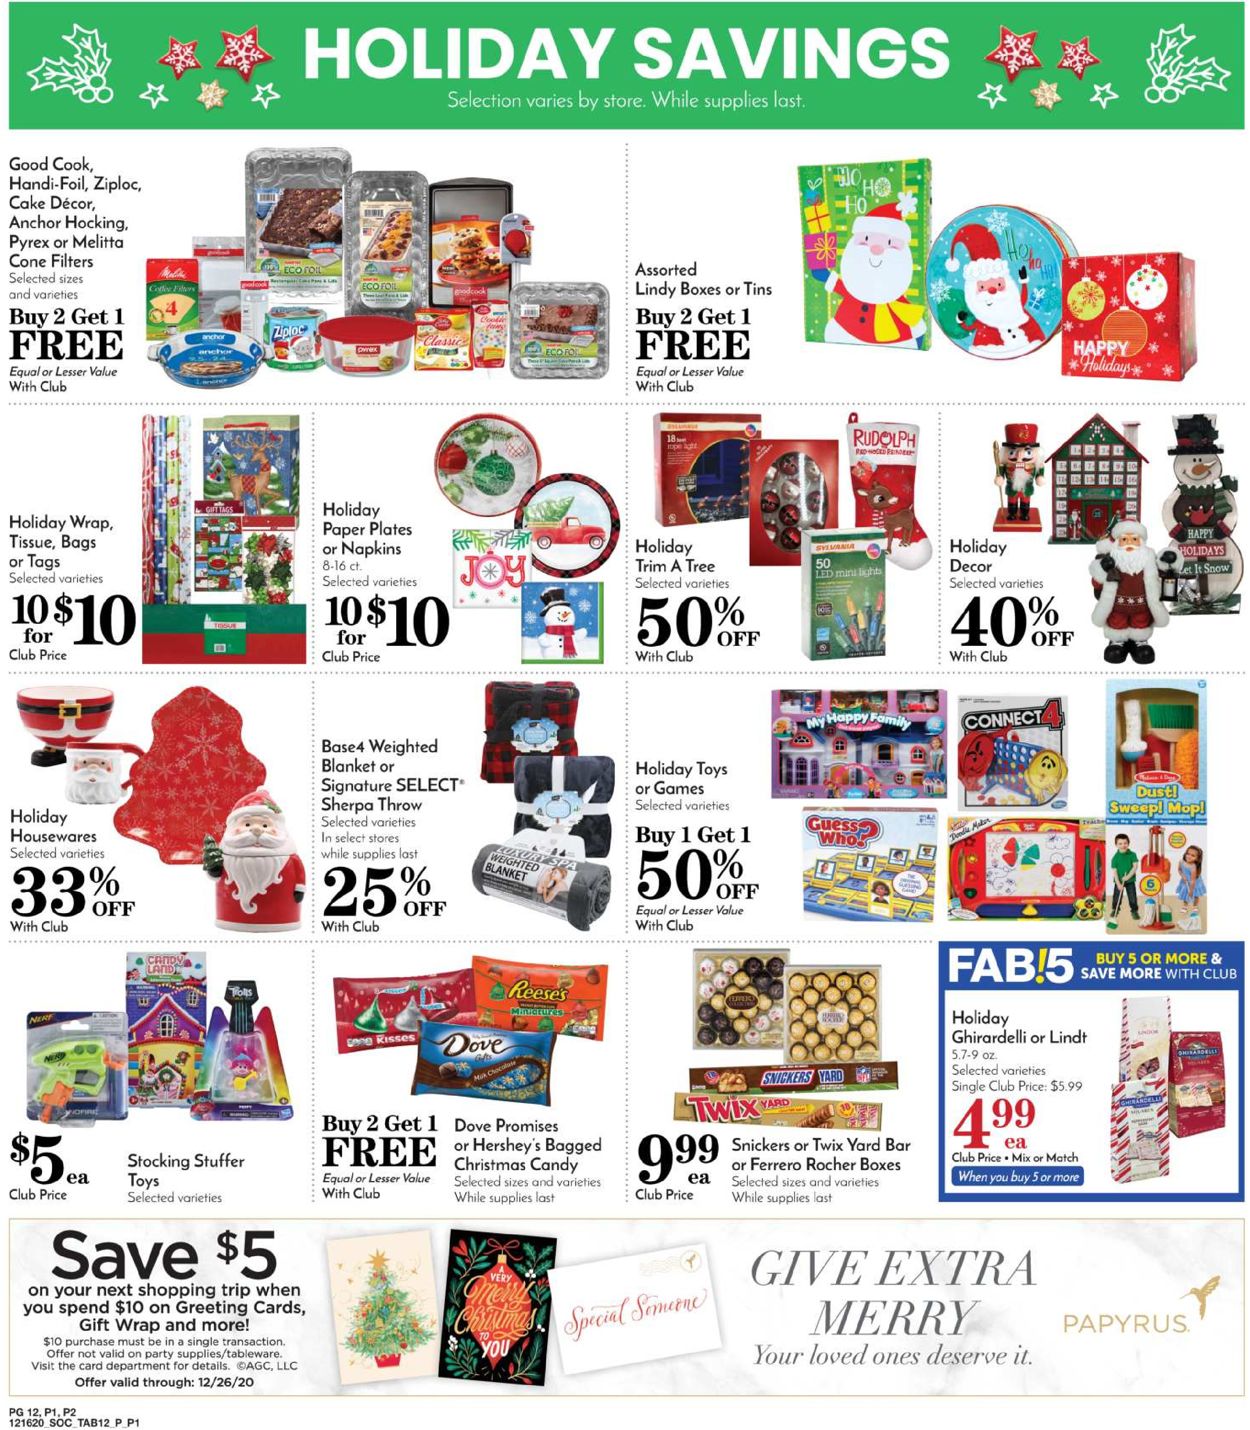 Pavilions Ad from 12/16/2020